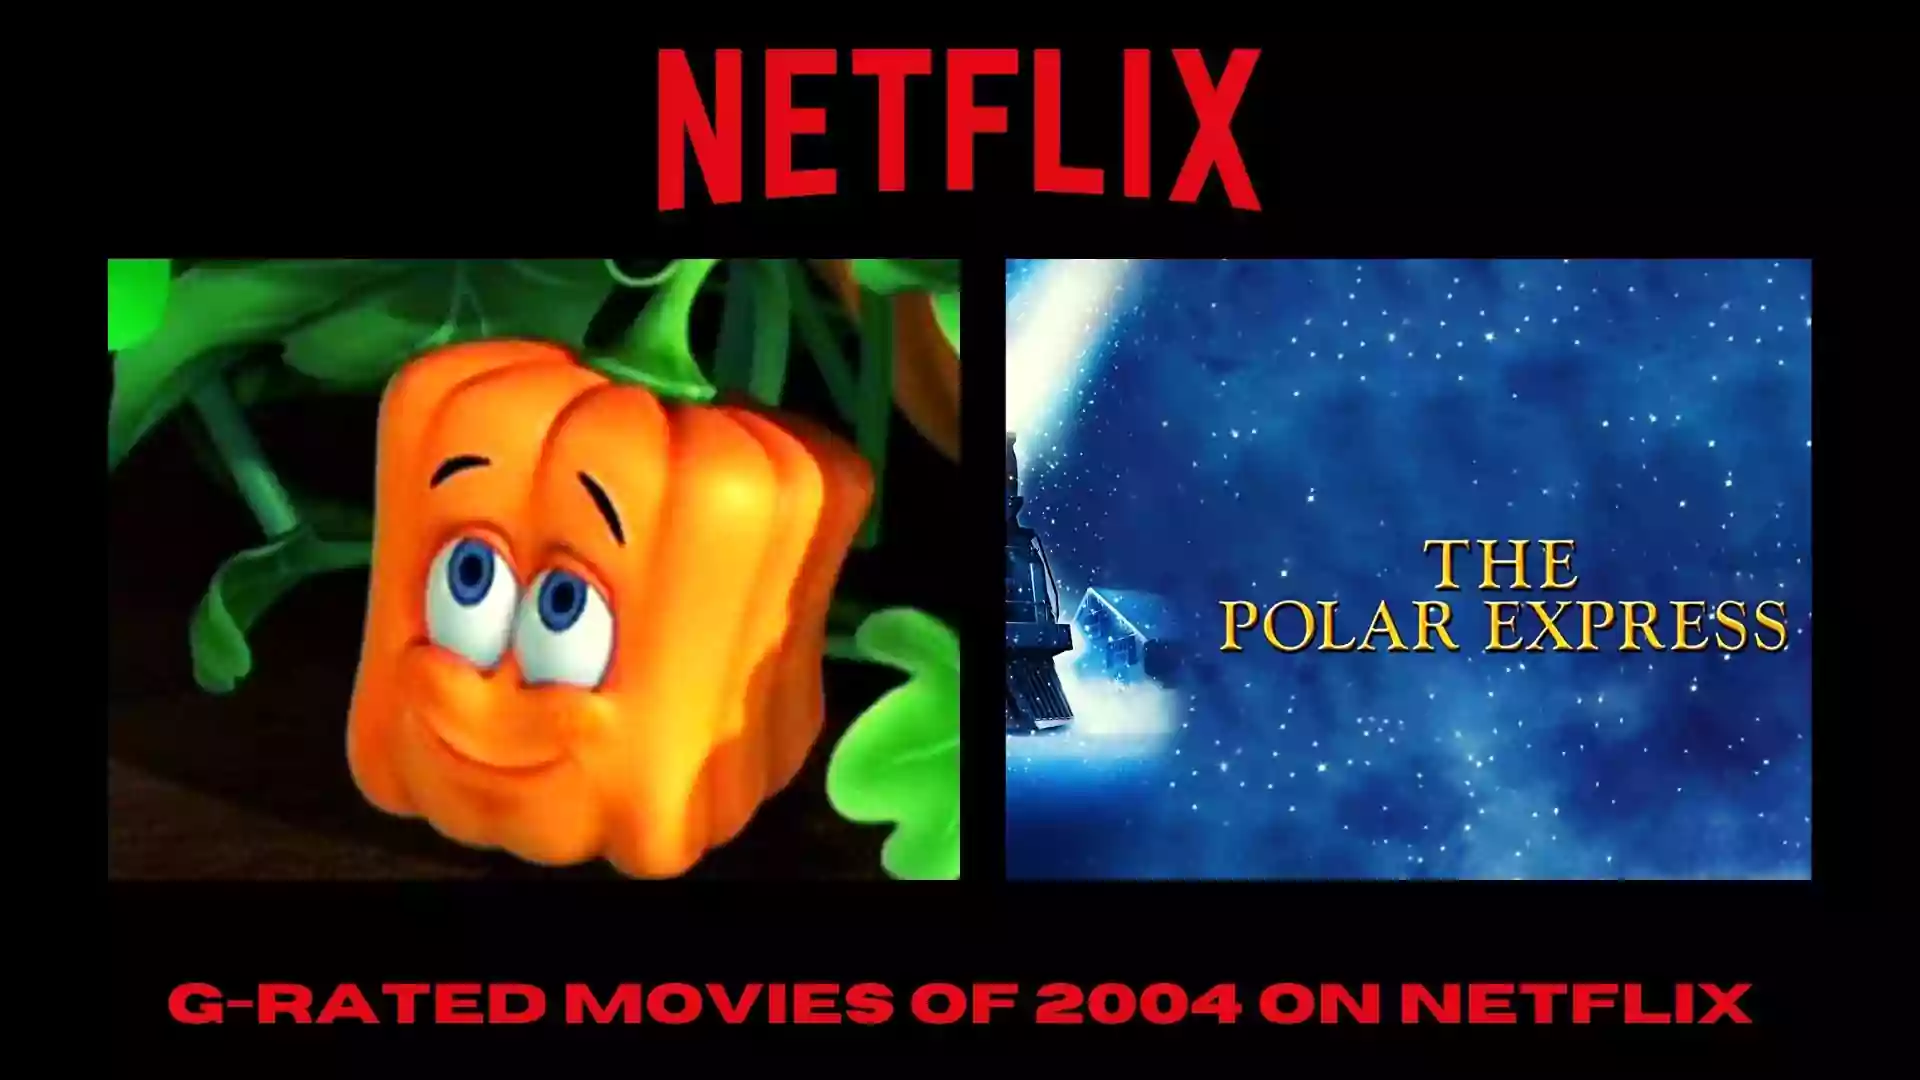 G-Rated Movie of 2004 on Netflix